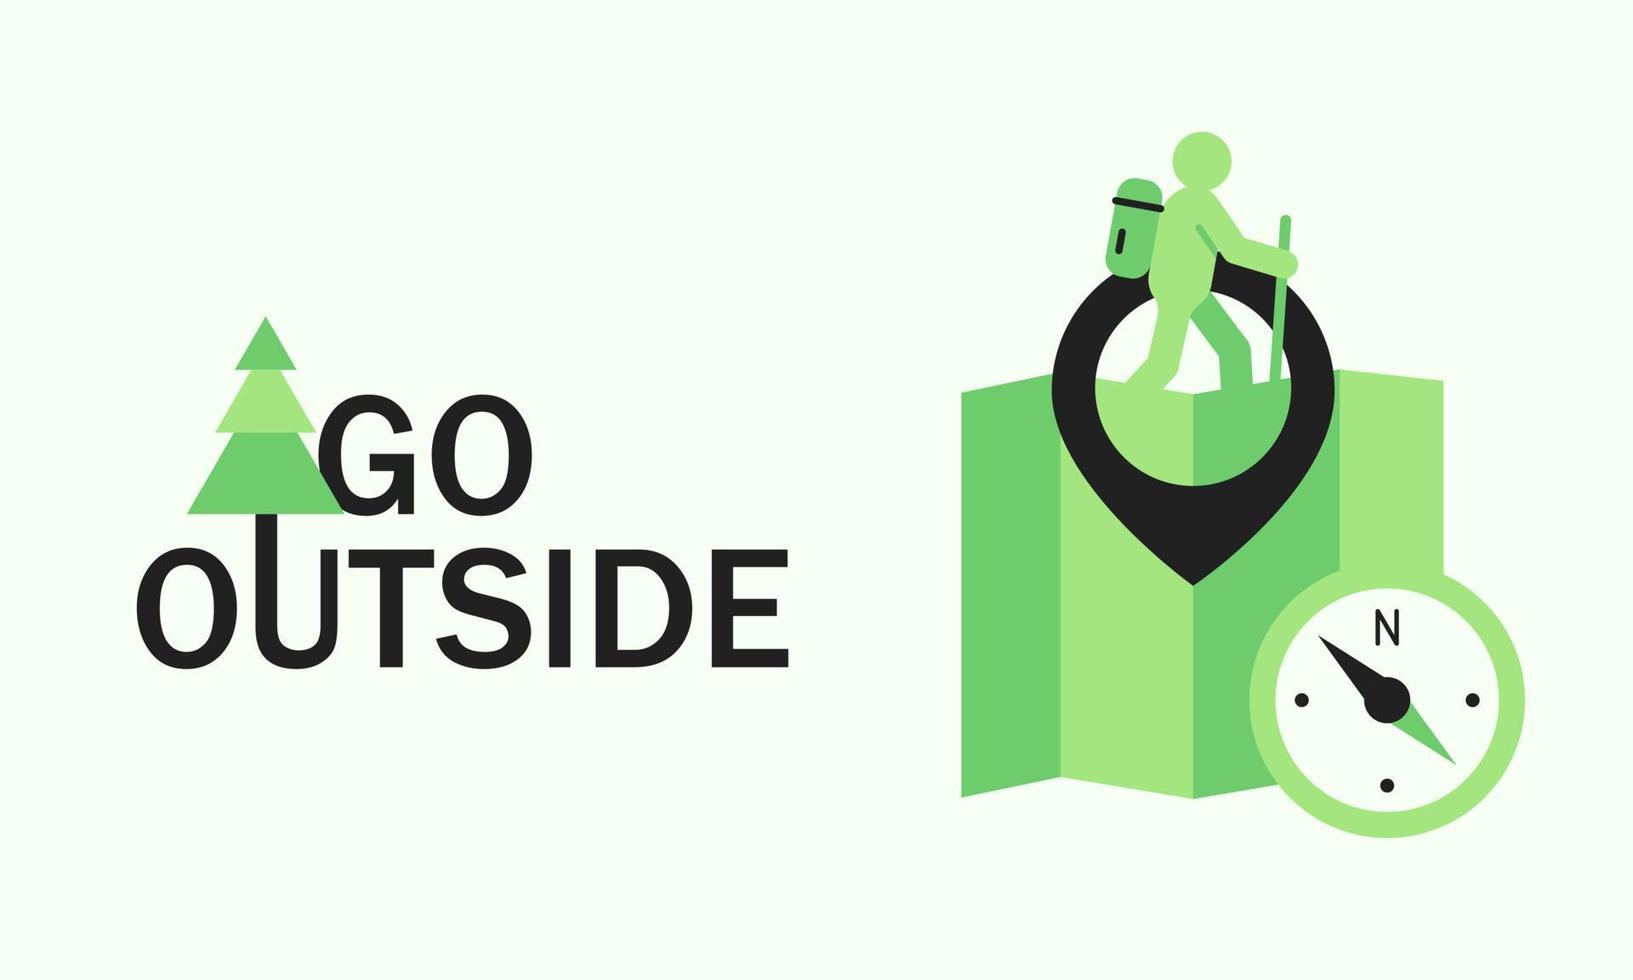 Go outside text with tree and hiker with backpack on map and compass. Concept outdoor and travel healthy lifestyle banner vector